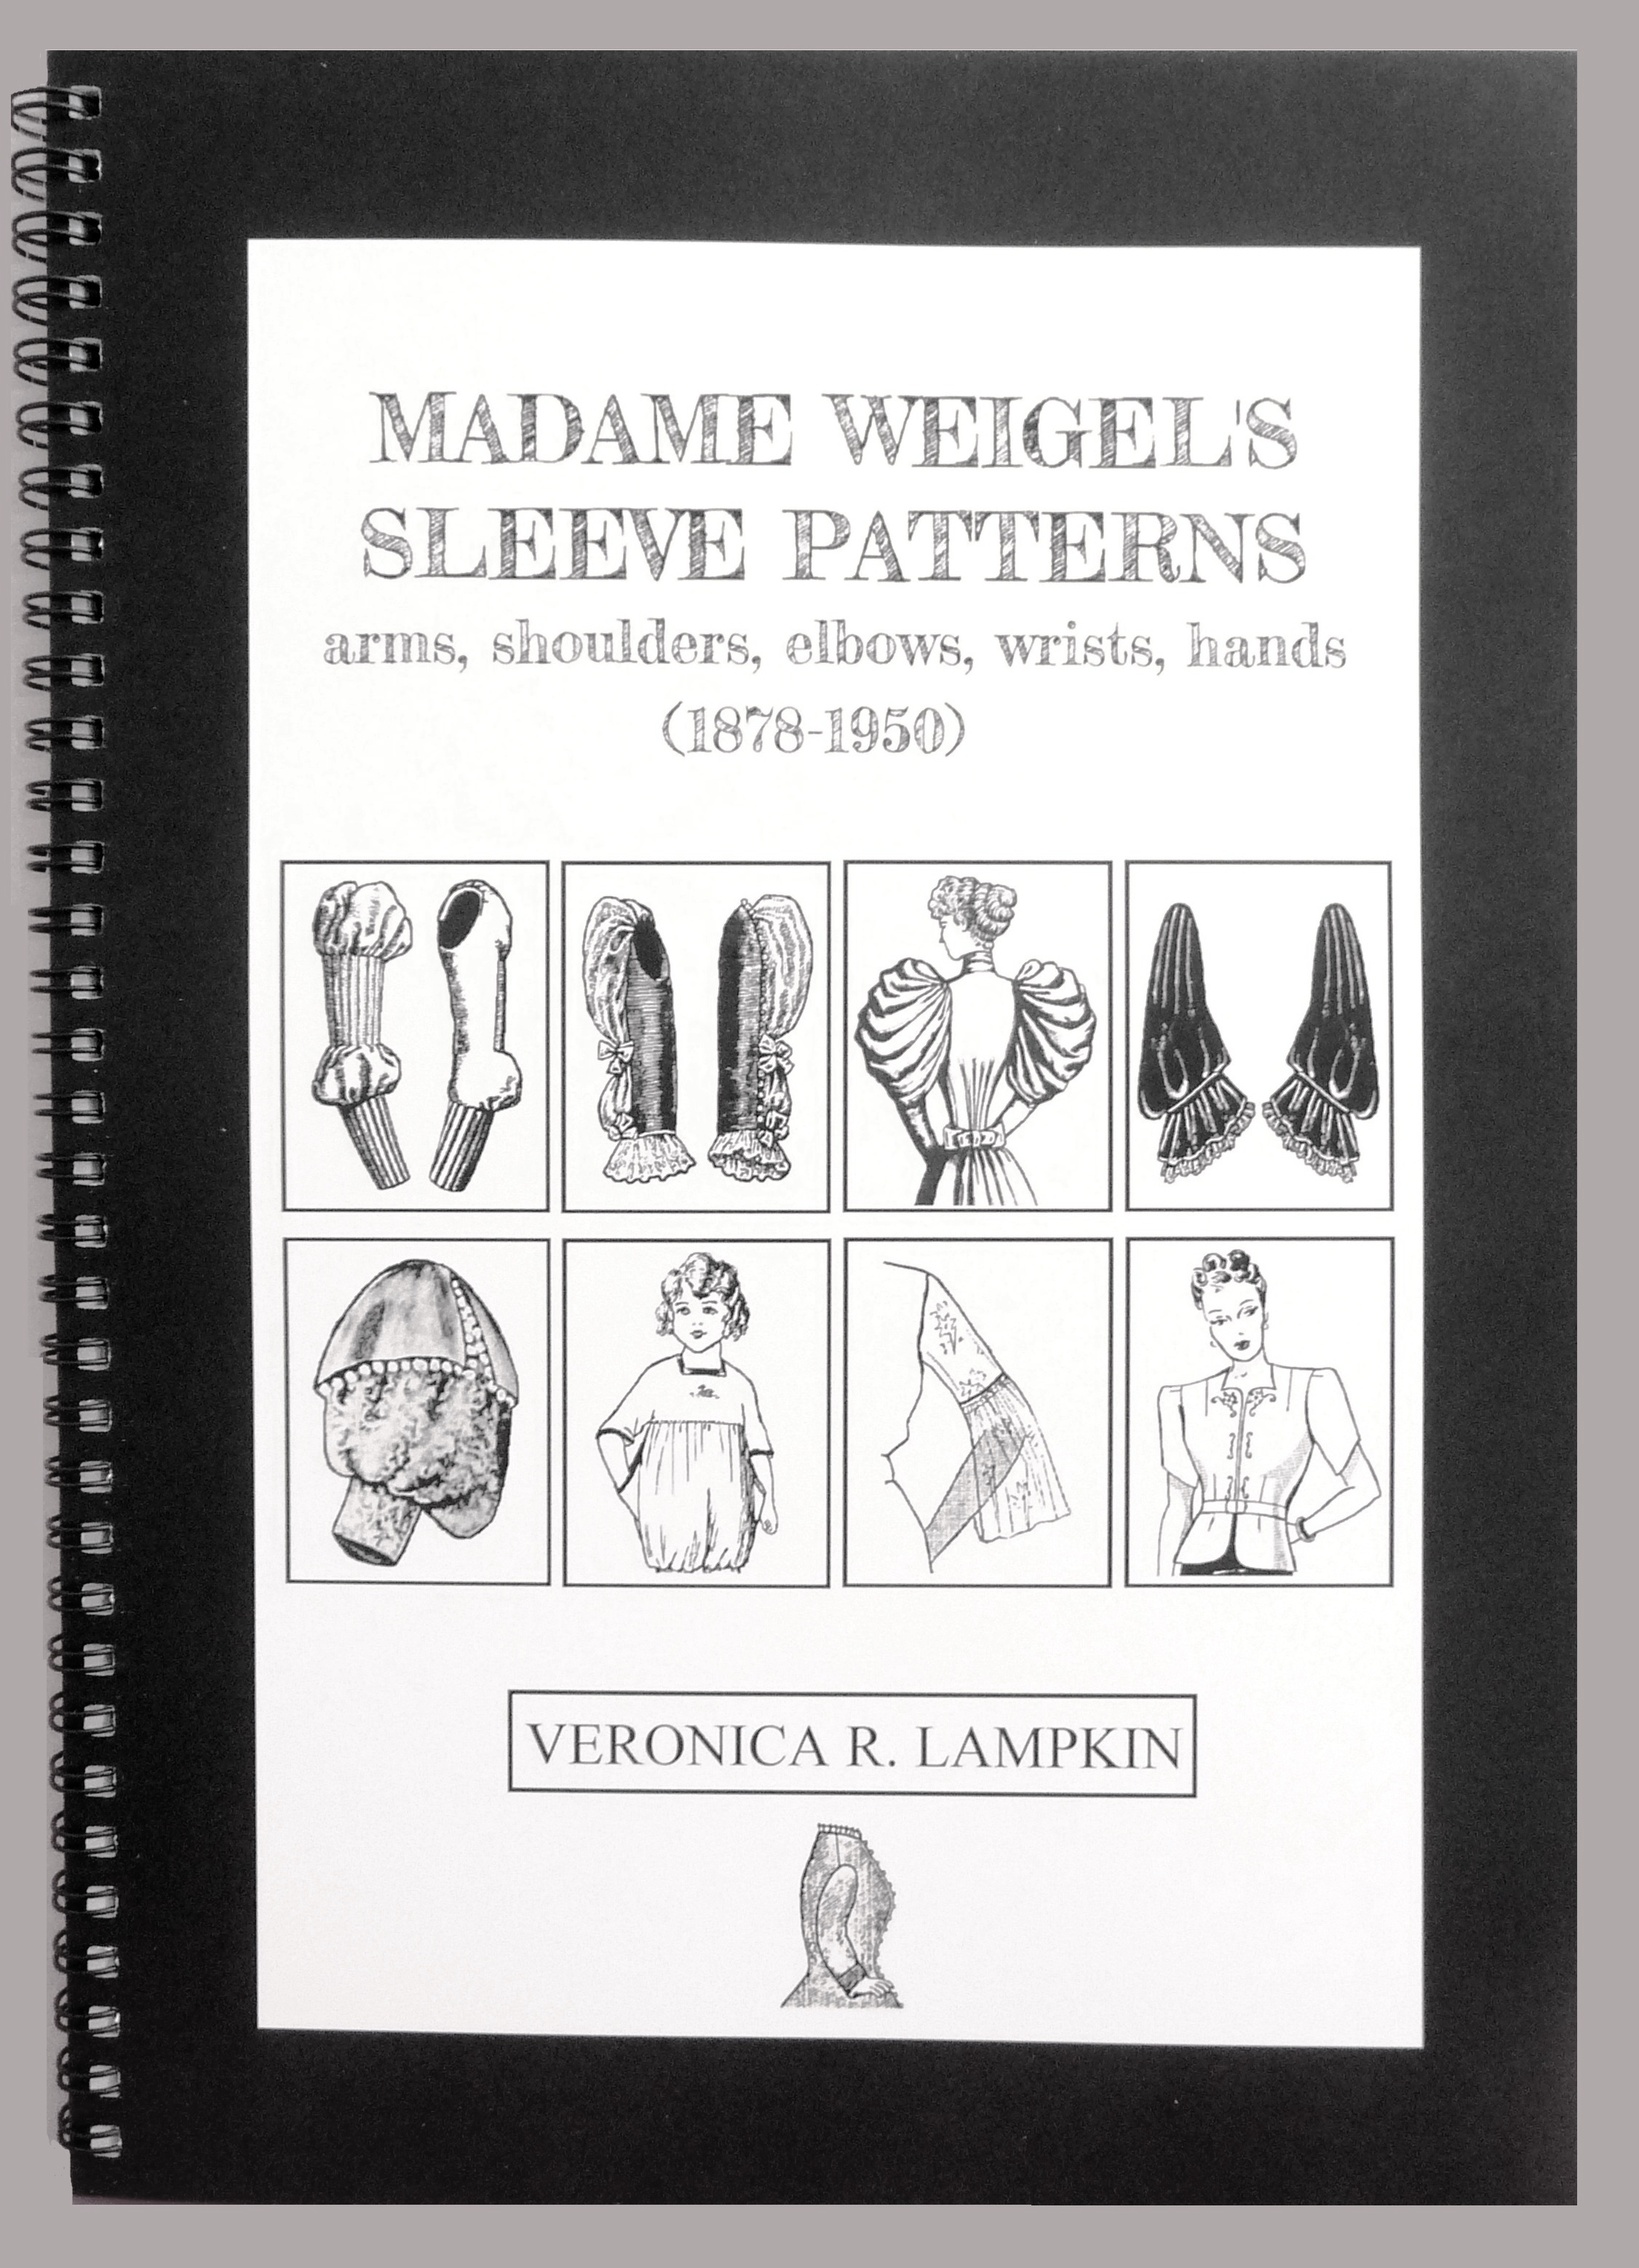 Madame Weigel's Sleeve Patterns: arms, shoulders, elbows, wrists, hands (1878-1950)